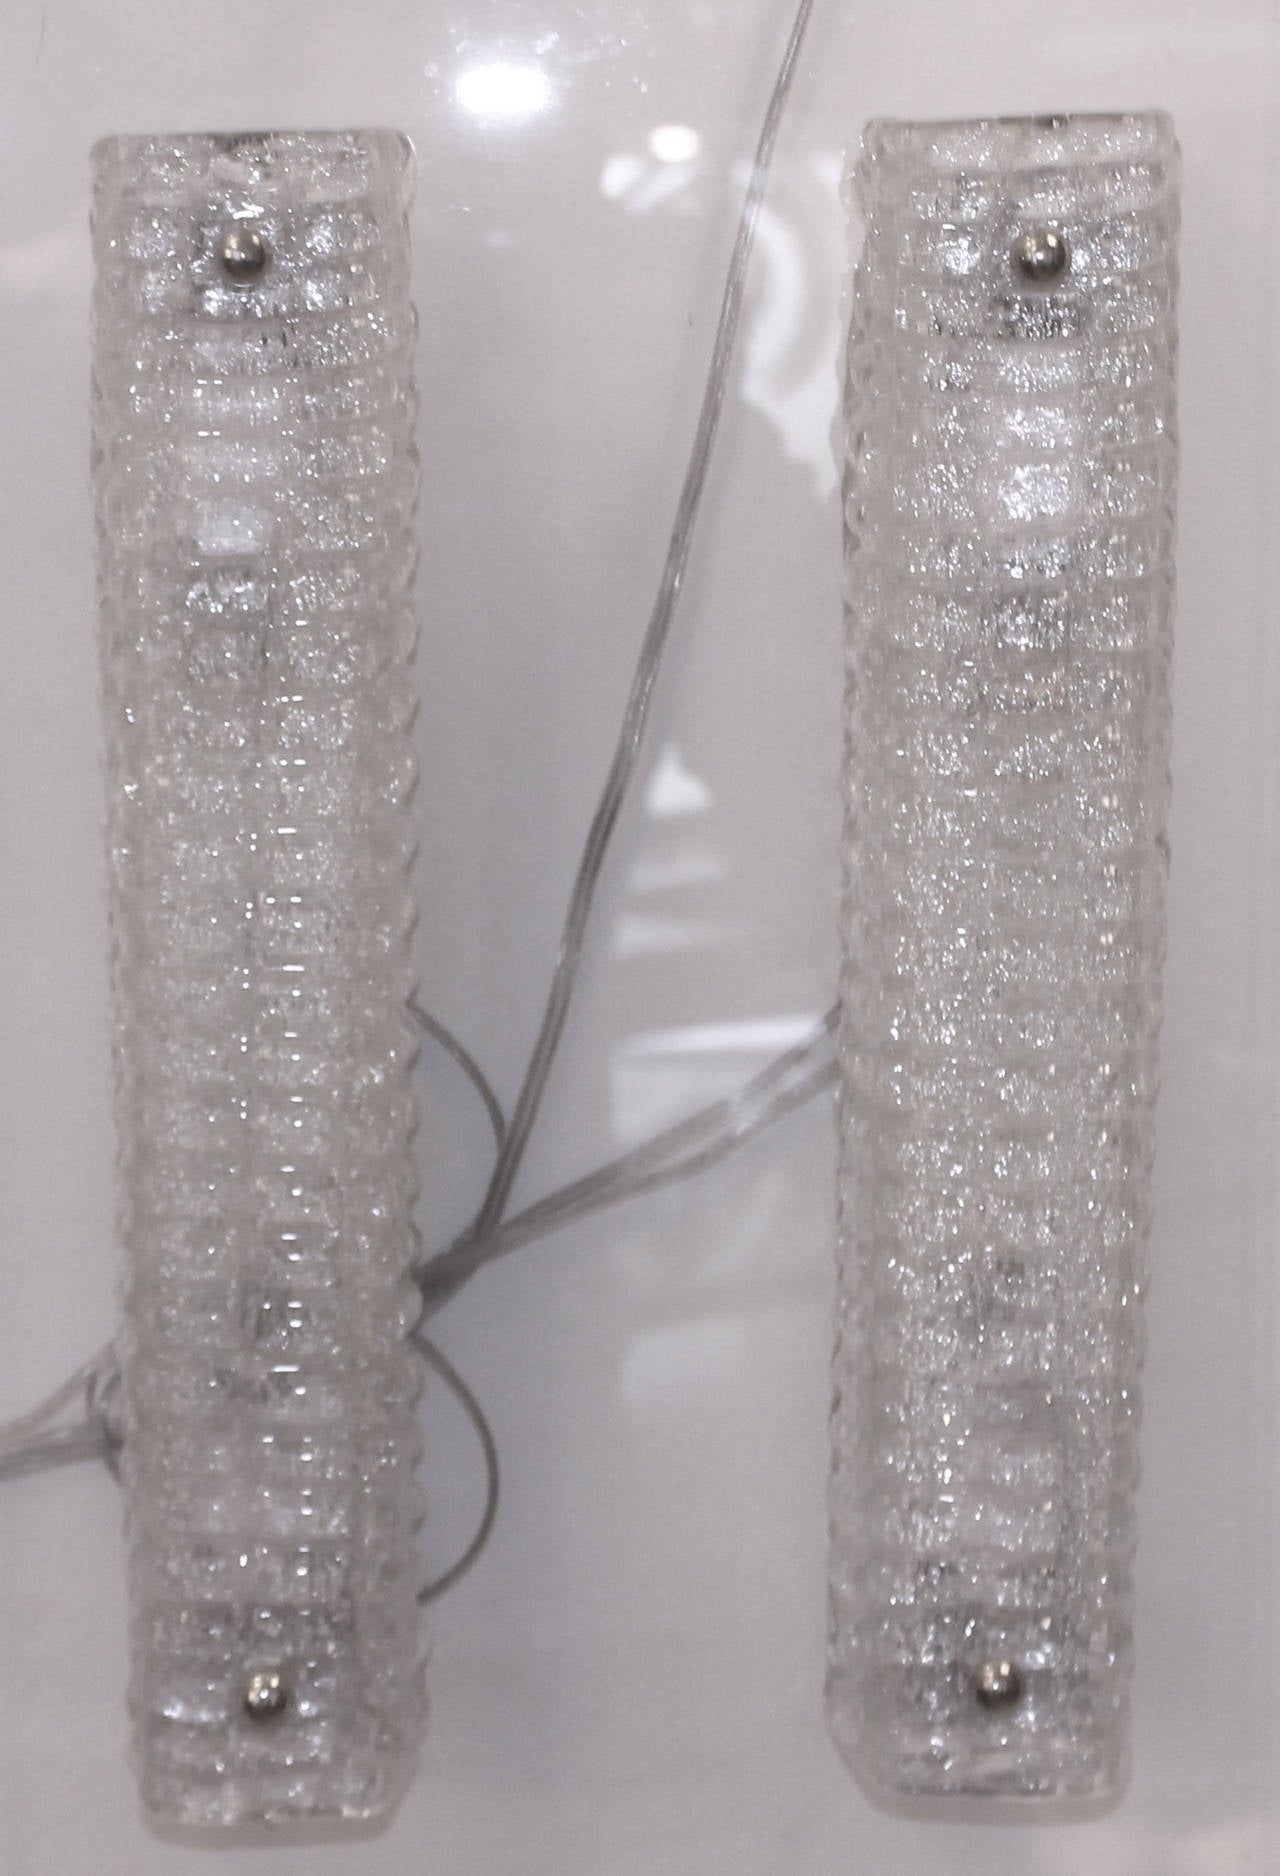 Molded Thin Elongated Venetian Glass Sconces, Italy, 1960s-1970s